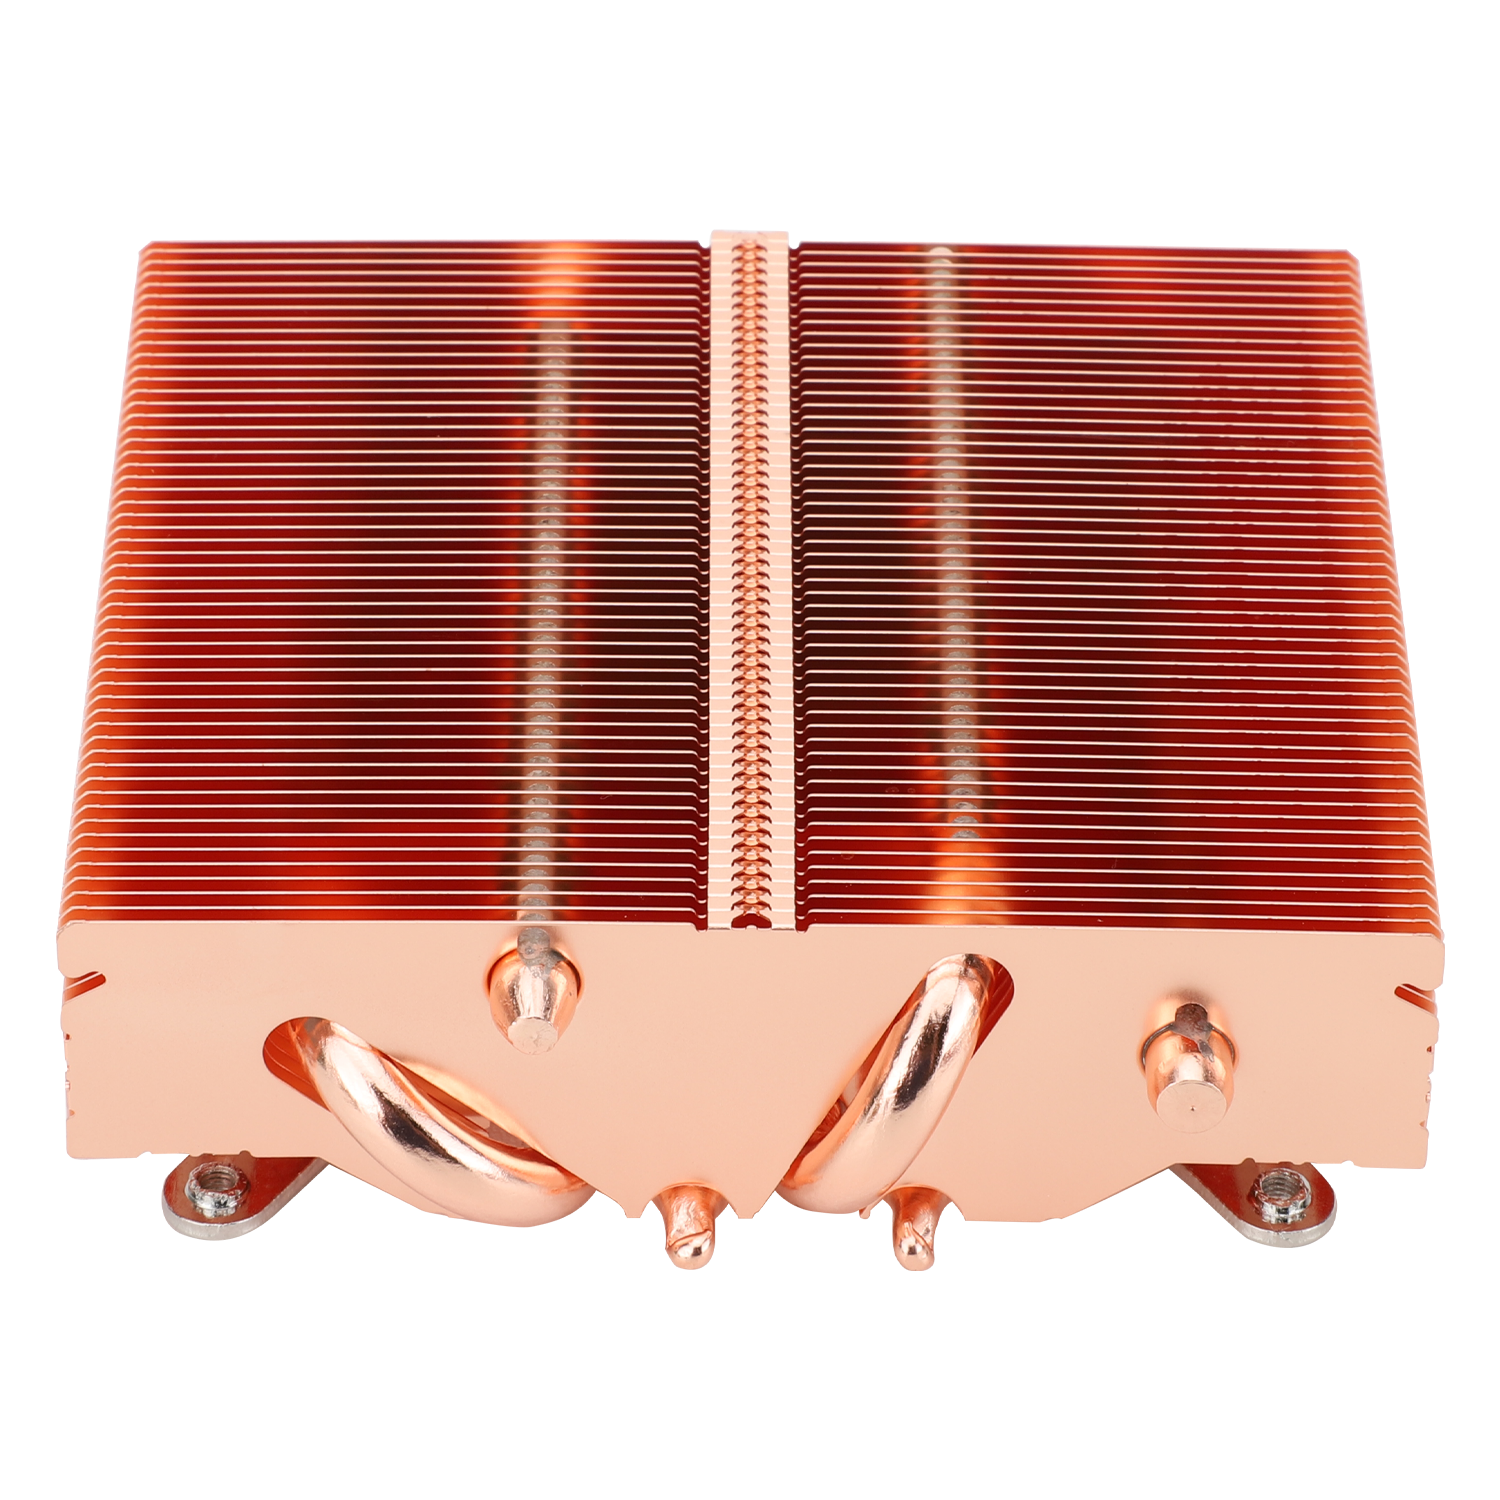 Thermalright AXP90 X47 Low Profile CPU Cooler, with 92mm TL-9015 Slim PWM  Fan, ITX CPU Cooelr Fan, 47mm Height,for AMD AM4 AM5/Intel